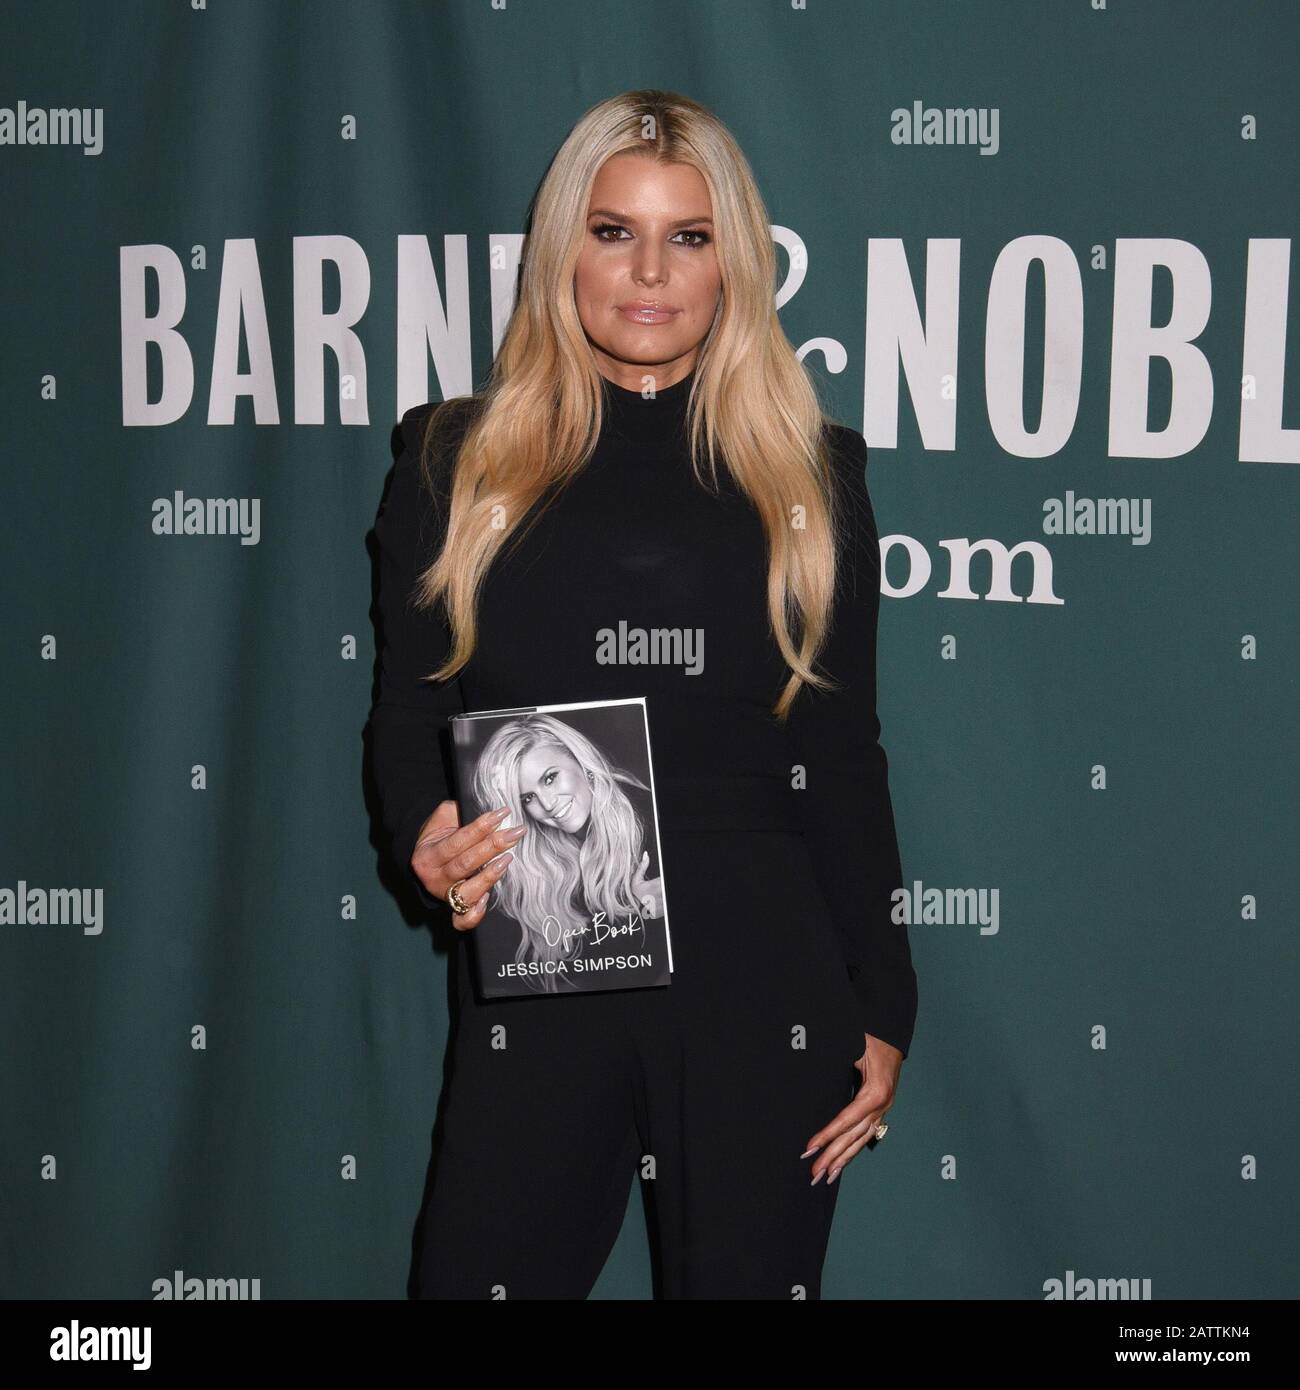 04 February 2020 - New York, New York - Jessica Simpson at Fan event for Ã’OPEN BOOKÃ“ by Jessica Simpson at Barnes and Noble Union Square. (Credit Image: © Ylmj/AdMedia via ZUMA Wire) Stock Photo